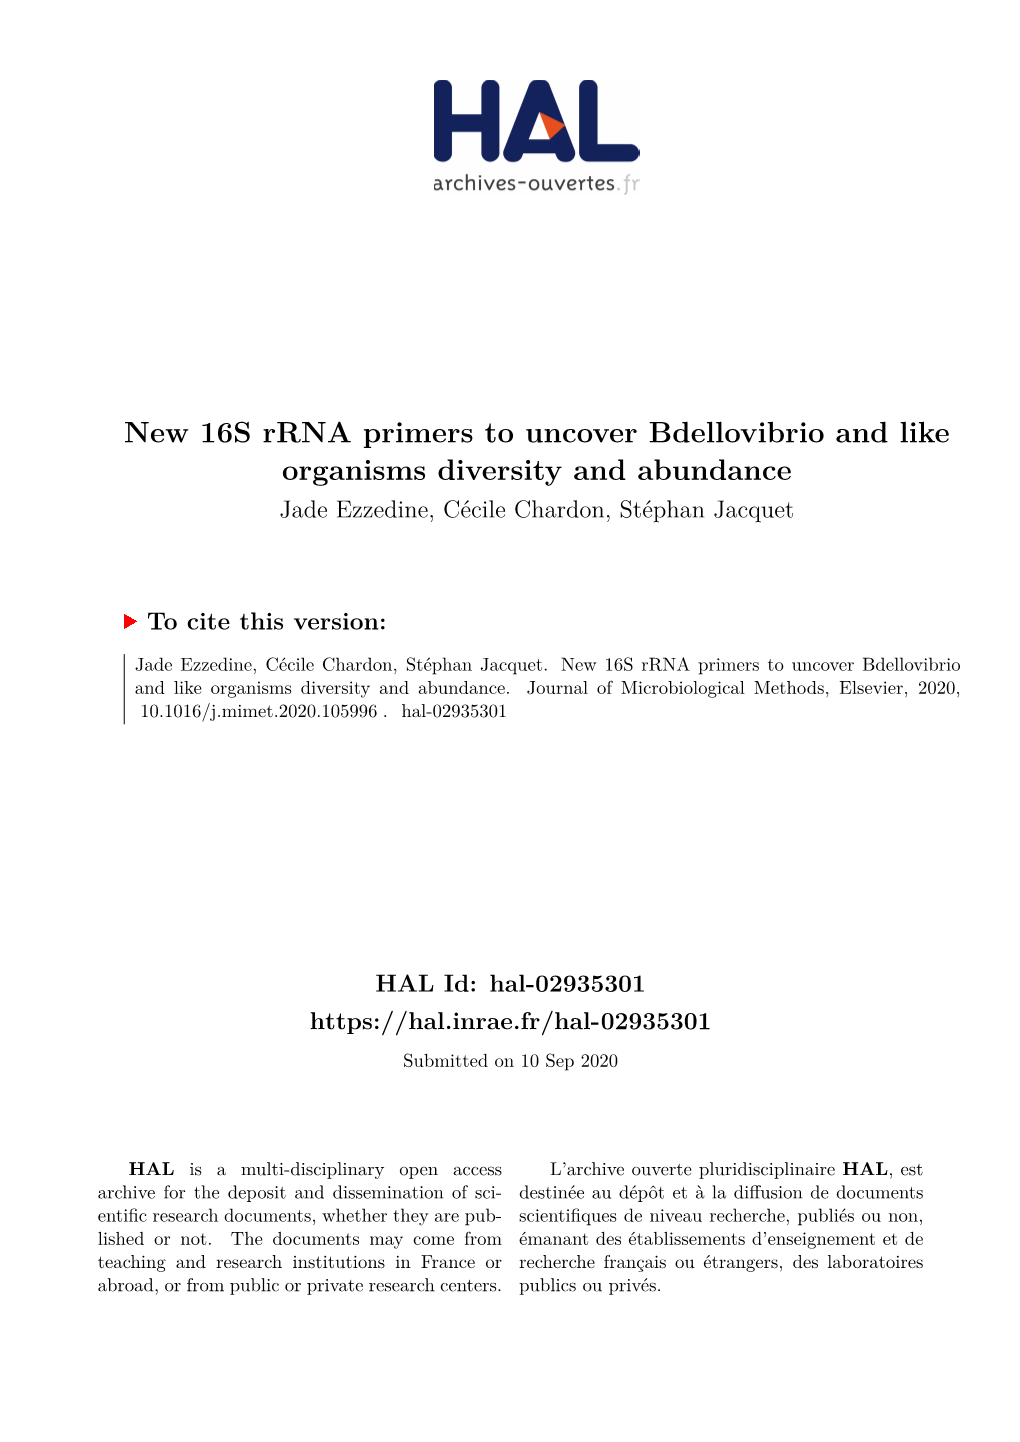 New 16S Rrna Primers to Uncover Bdellovibrio and Like Organisms Diversity and Abundance Jade Ezzedine, Cécile Chardon, Stéphan Jacquet